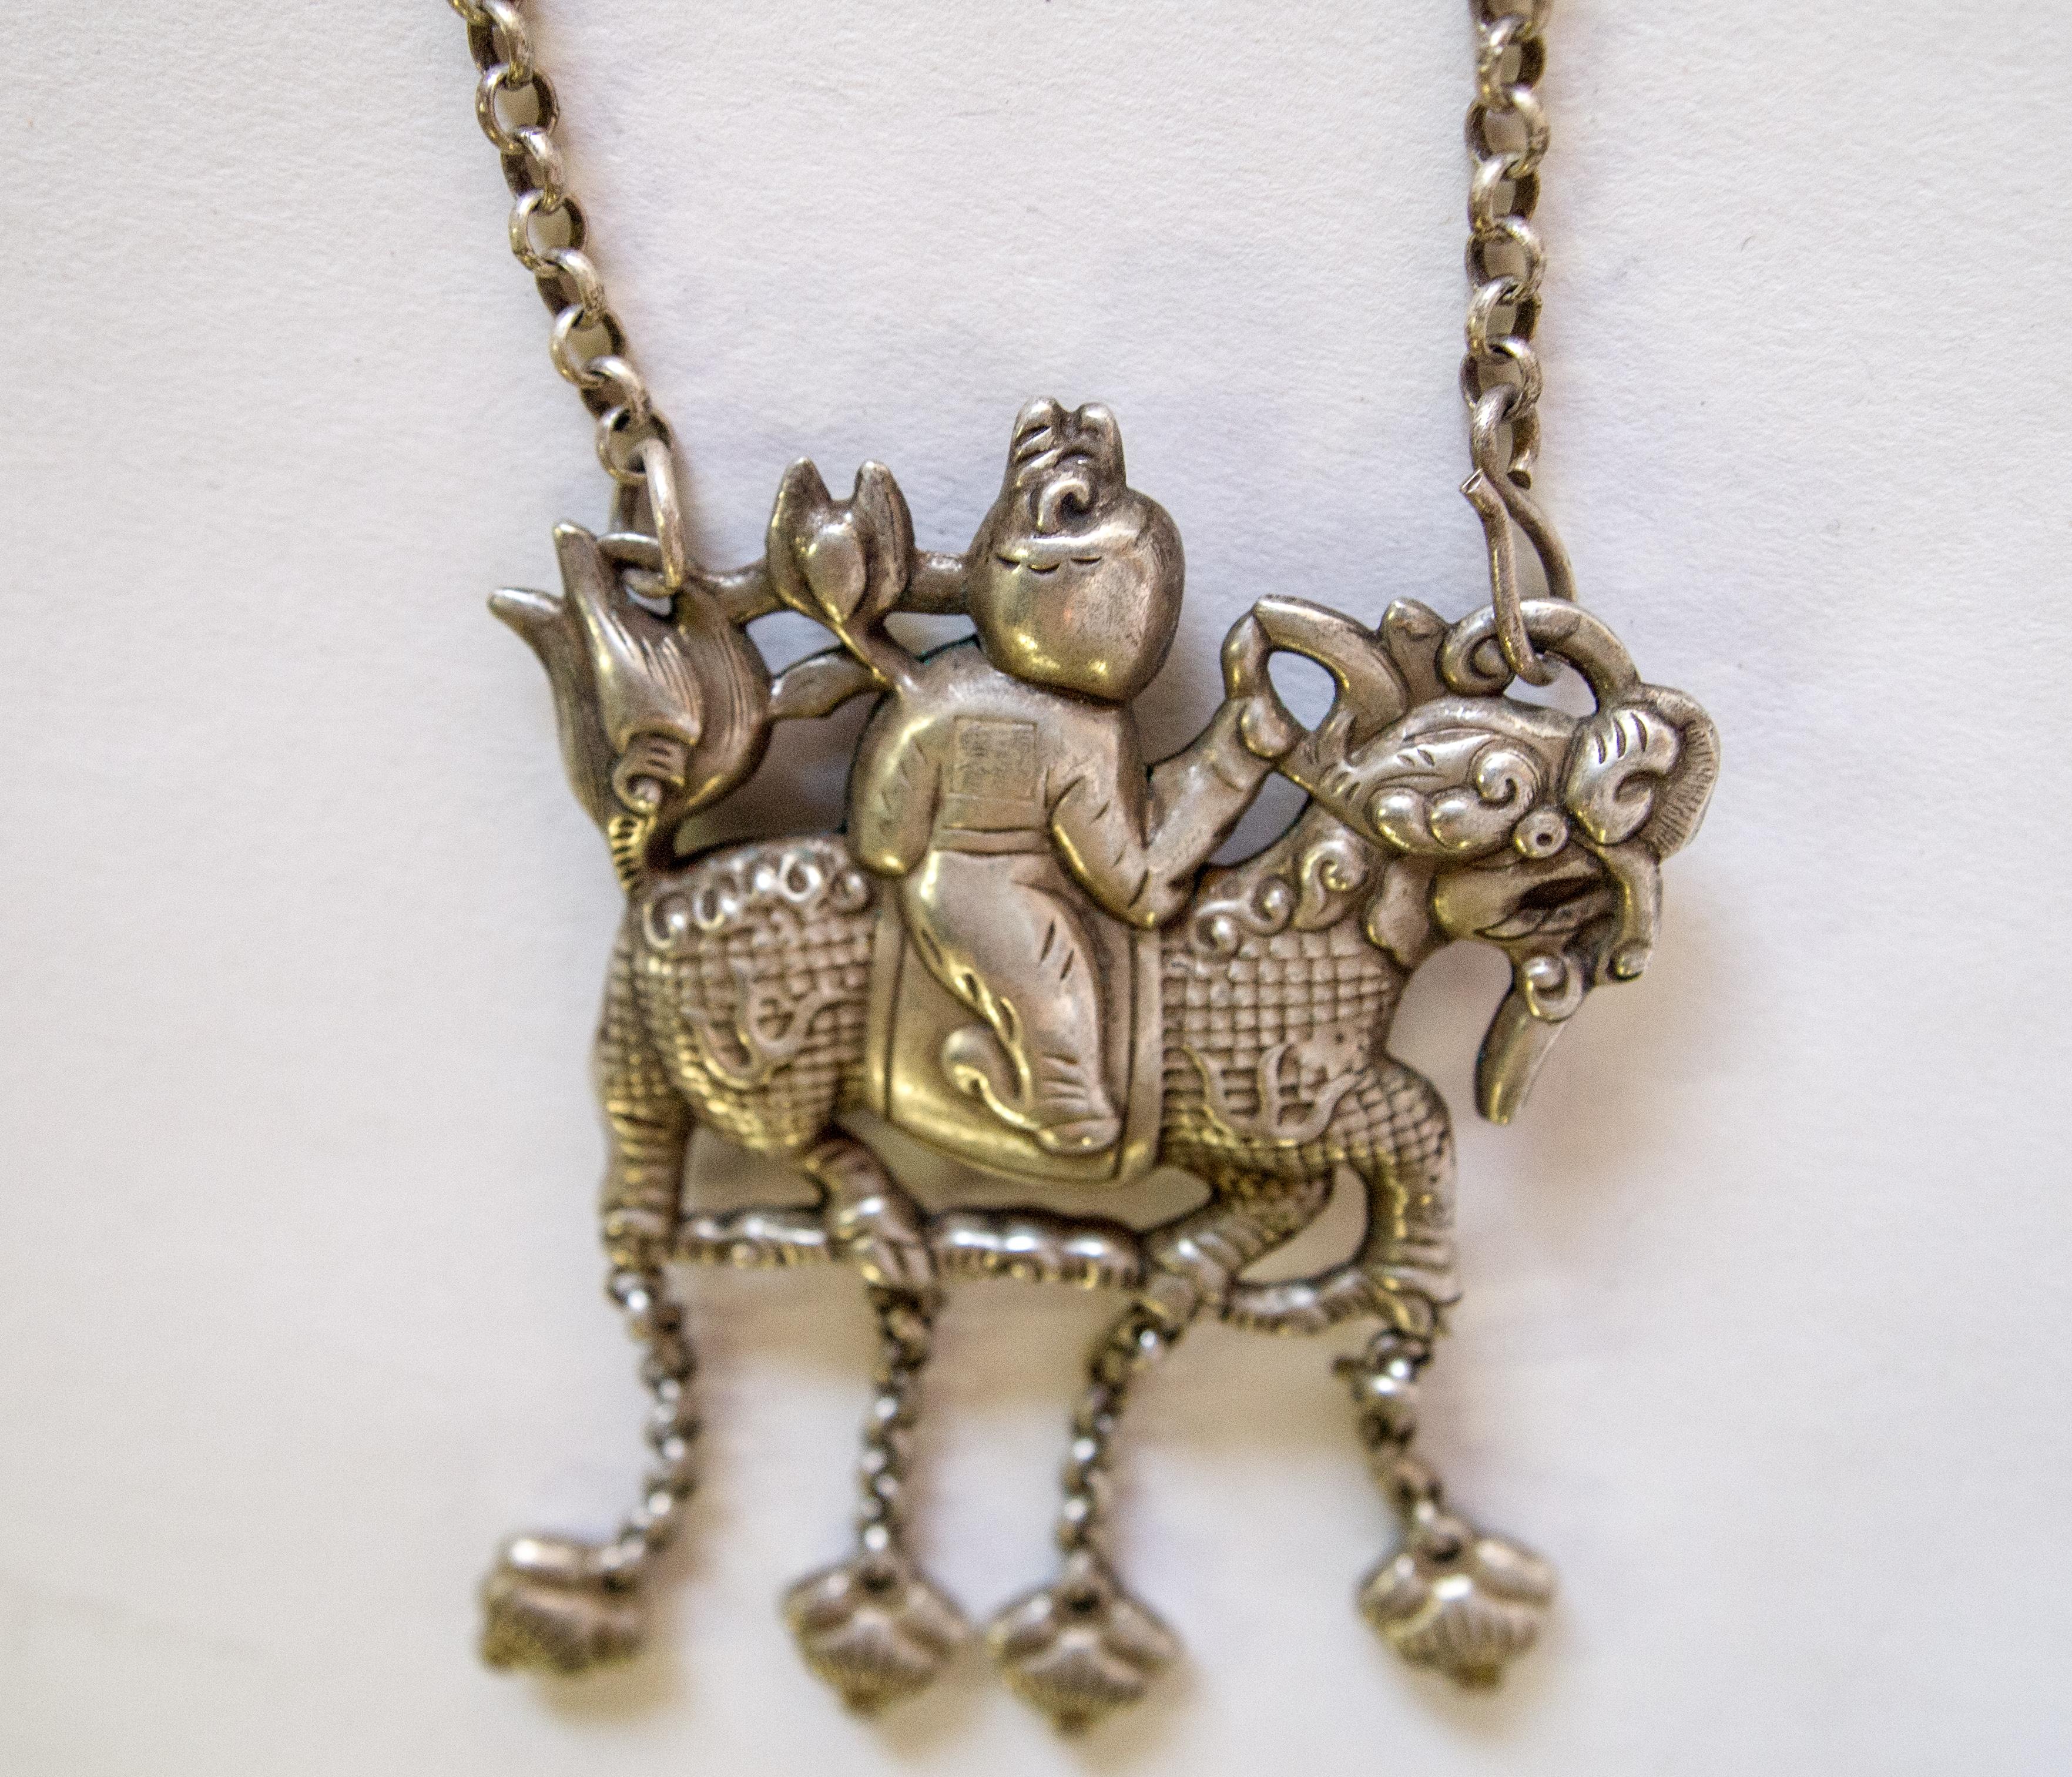 Tribal Qilin Amulet Necklace, Silver Alloy, Southwest China, Early 20th Century